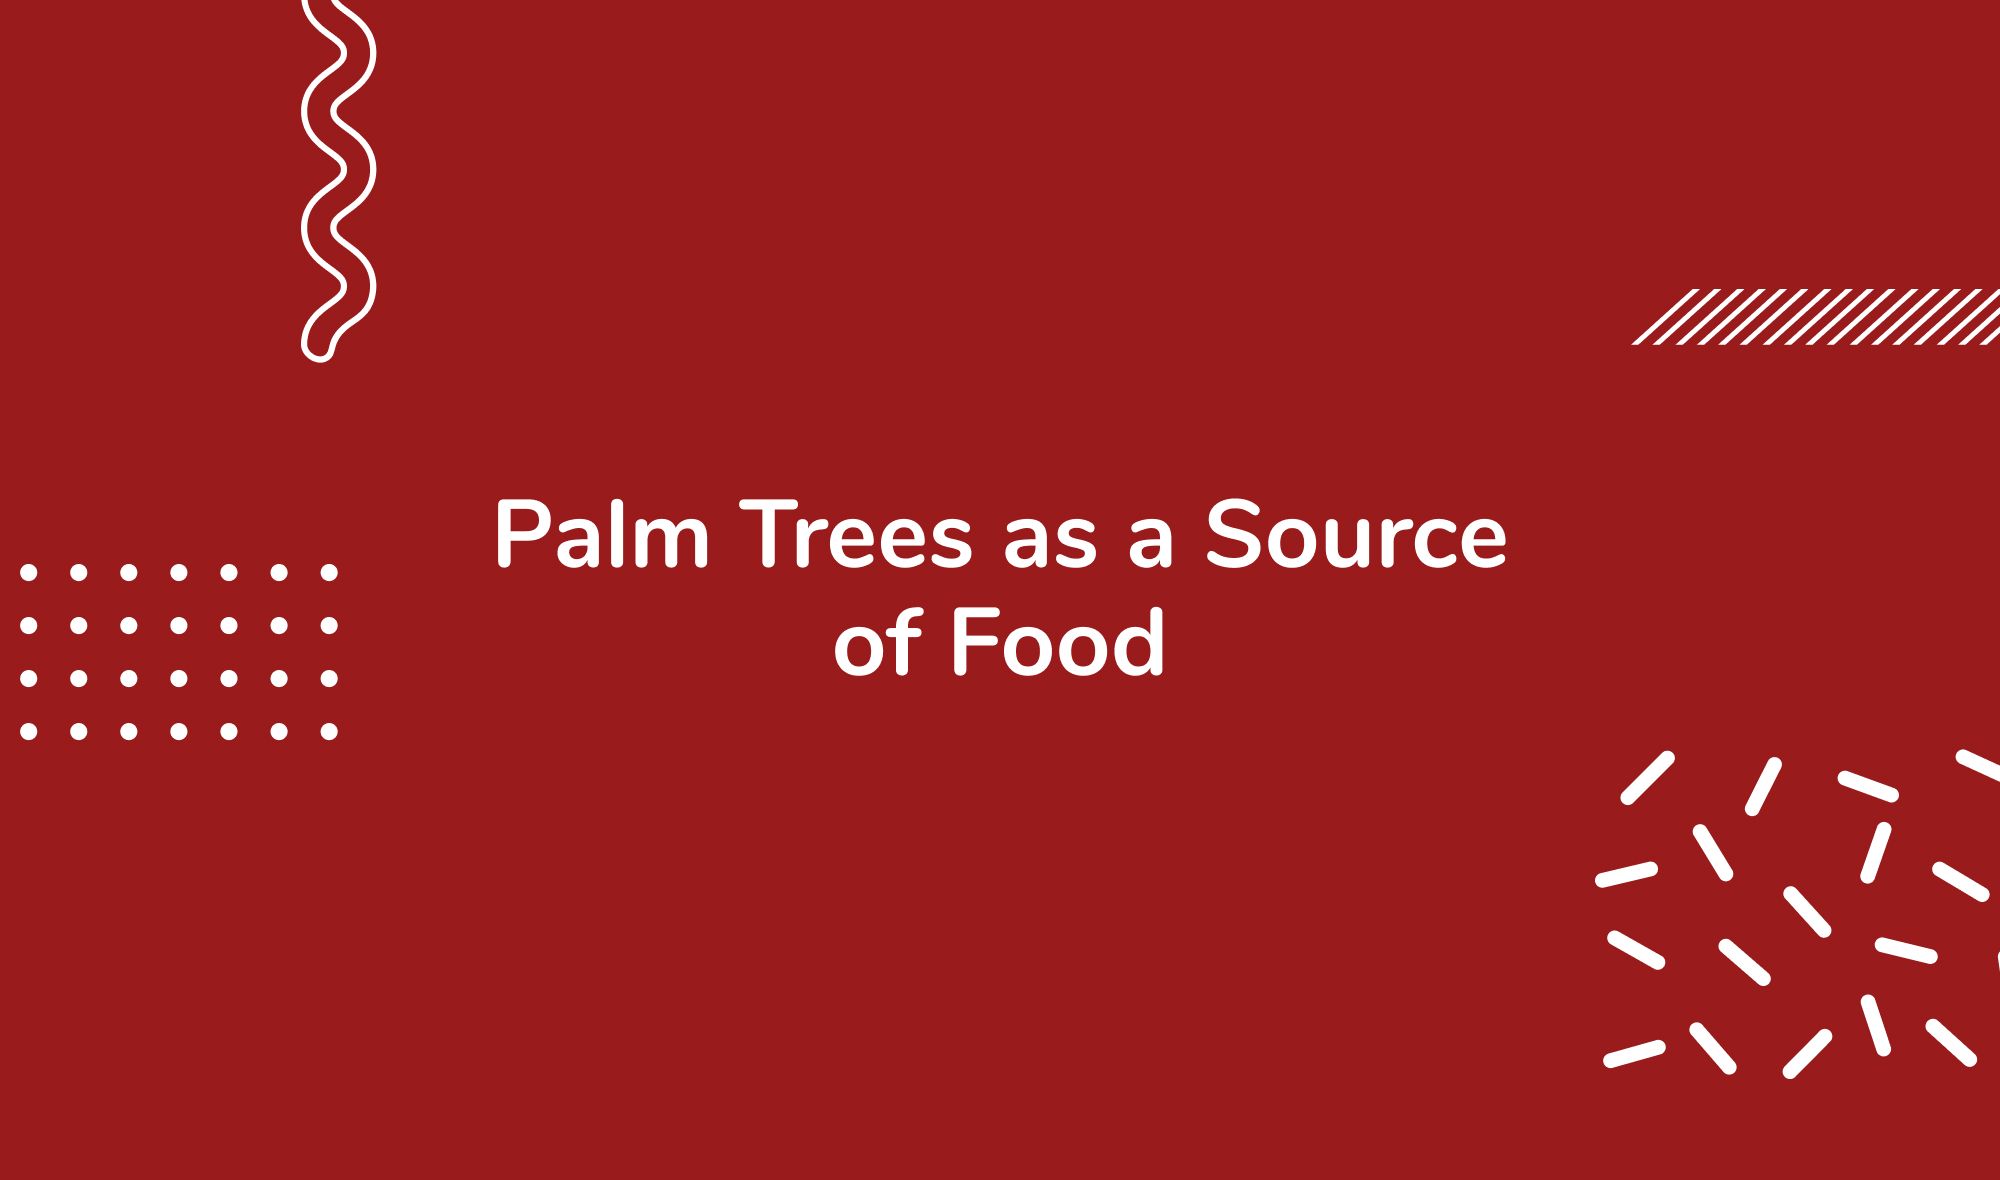 Palm Trees as a Source of Food and Other Commodities